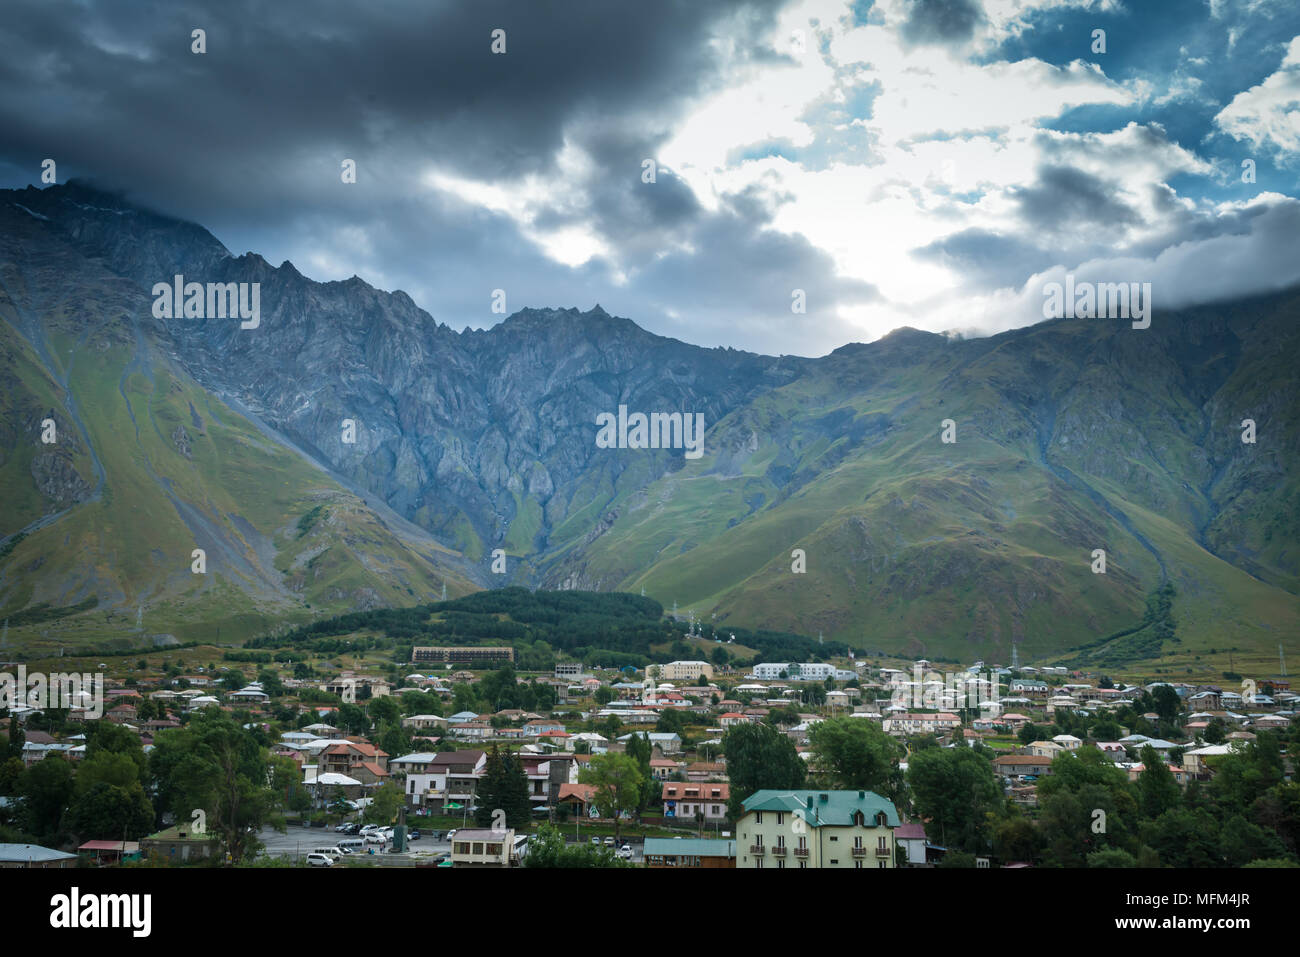 Beautiful landscape of majestic mountains, dramatic clouds and sky. View from the hill on village in the green valley Stock Photo